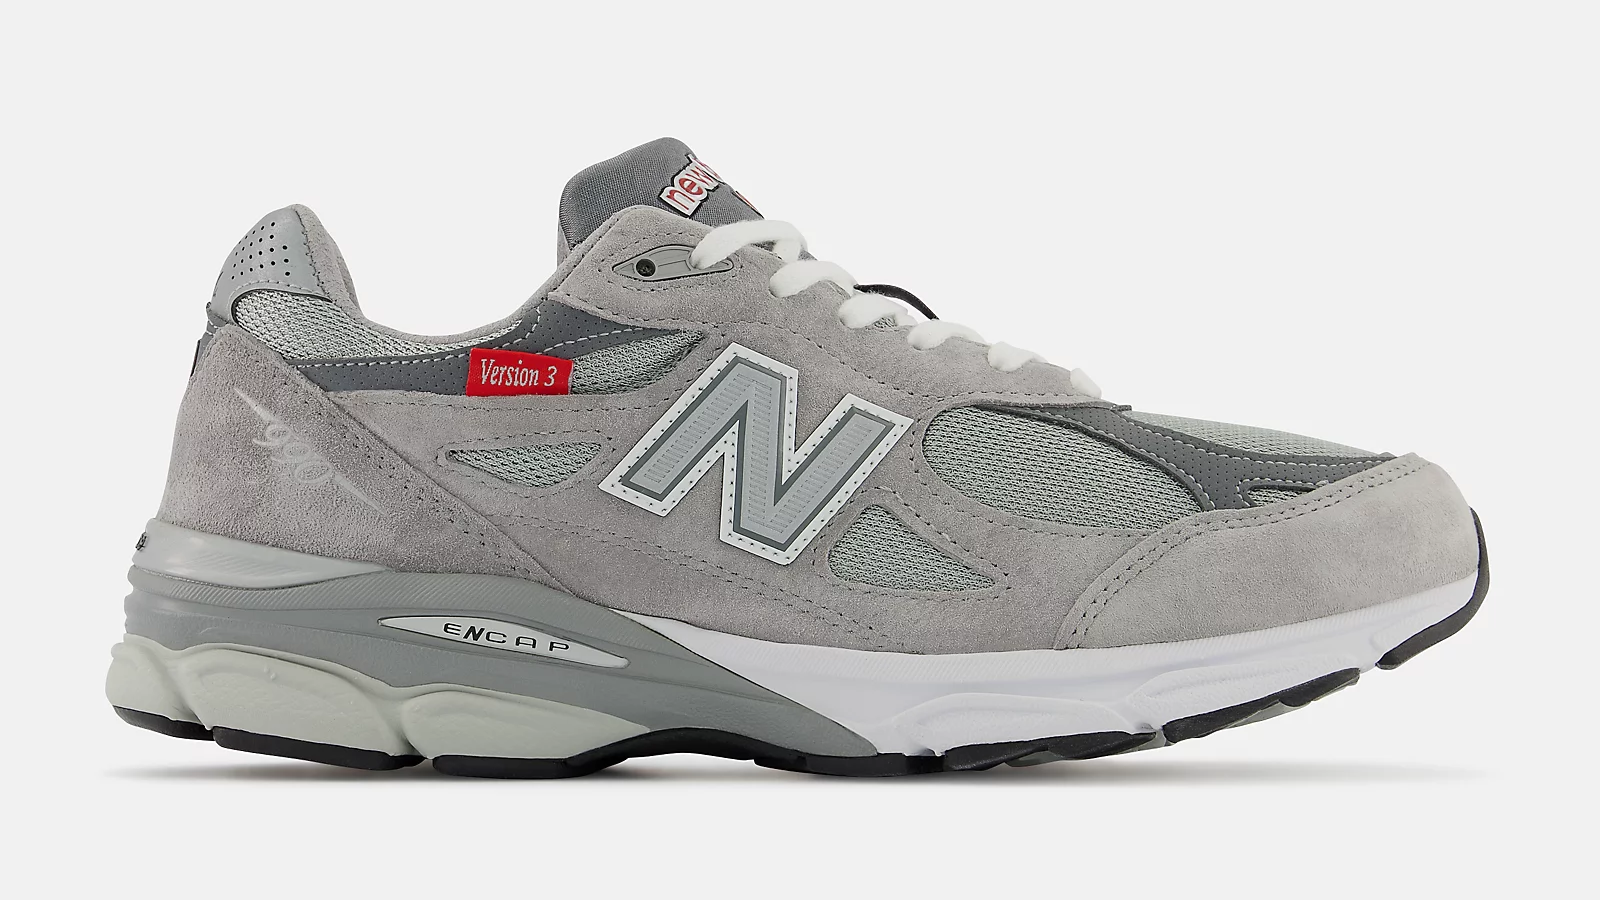 The 990’s original designers were tasked with creating the single best running shoe on the market. The finished product more than lived up to its billing. When it hit shelves for the first time in 1982 the 990 sported an elegantly understated grey colorway, and a then unheard of three-figure price tag. For avid runners and ahead of the curve tastemakers alike, the 990 was a mark of quality and superior taste. There have been updates to the design since ’82, and more color options, but the 990’s aspirational status symbol aura has never changed. Simply put, the 990 is the shoe so good, that we’ve never stopped making it. The 990v3 features a premium upper construction and ENCAP midsole cushioning.